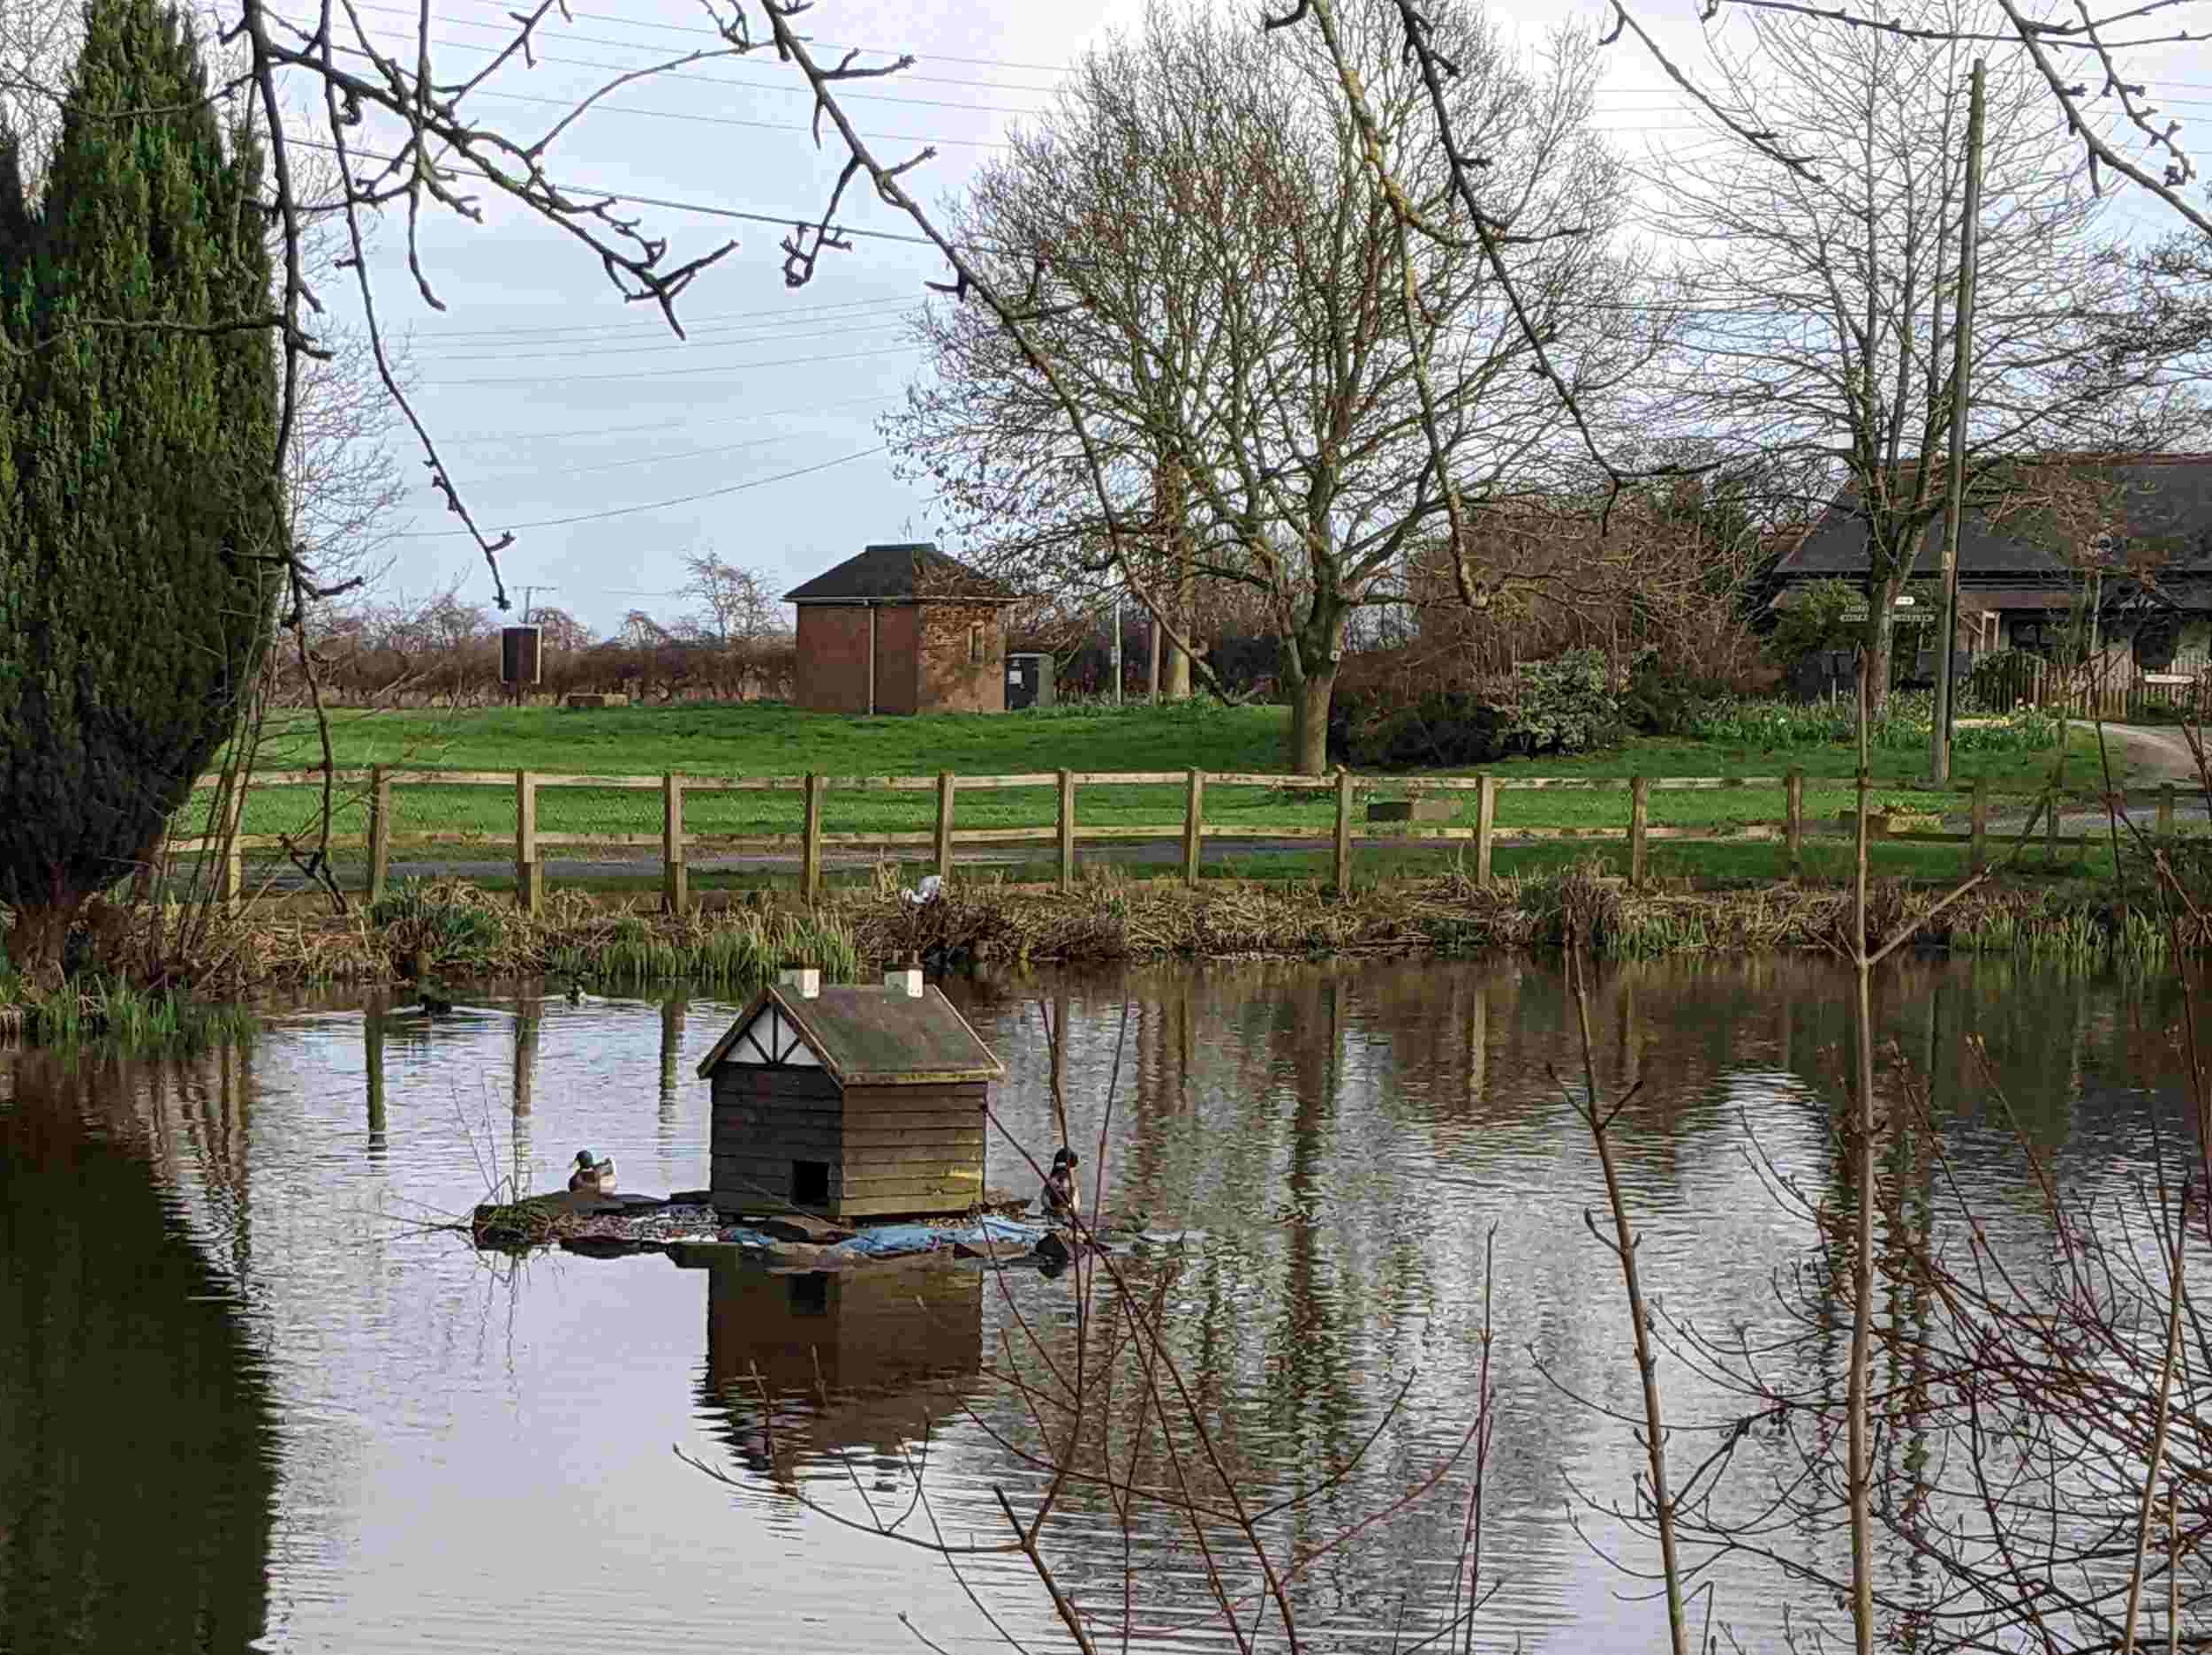 High water on the village pond, 23rd February